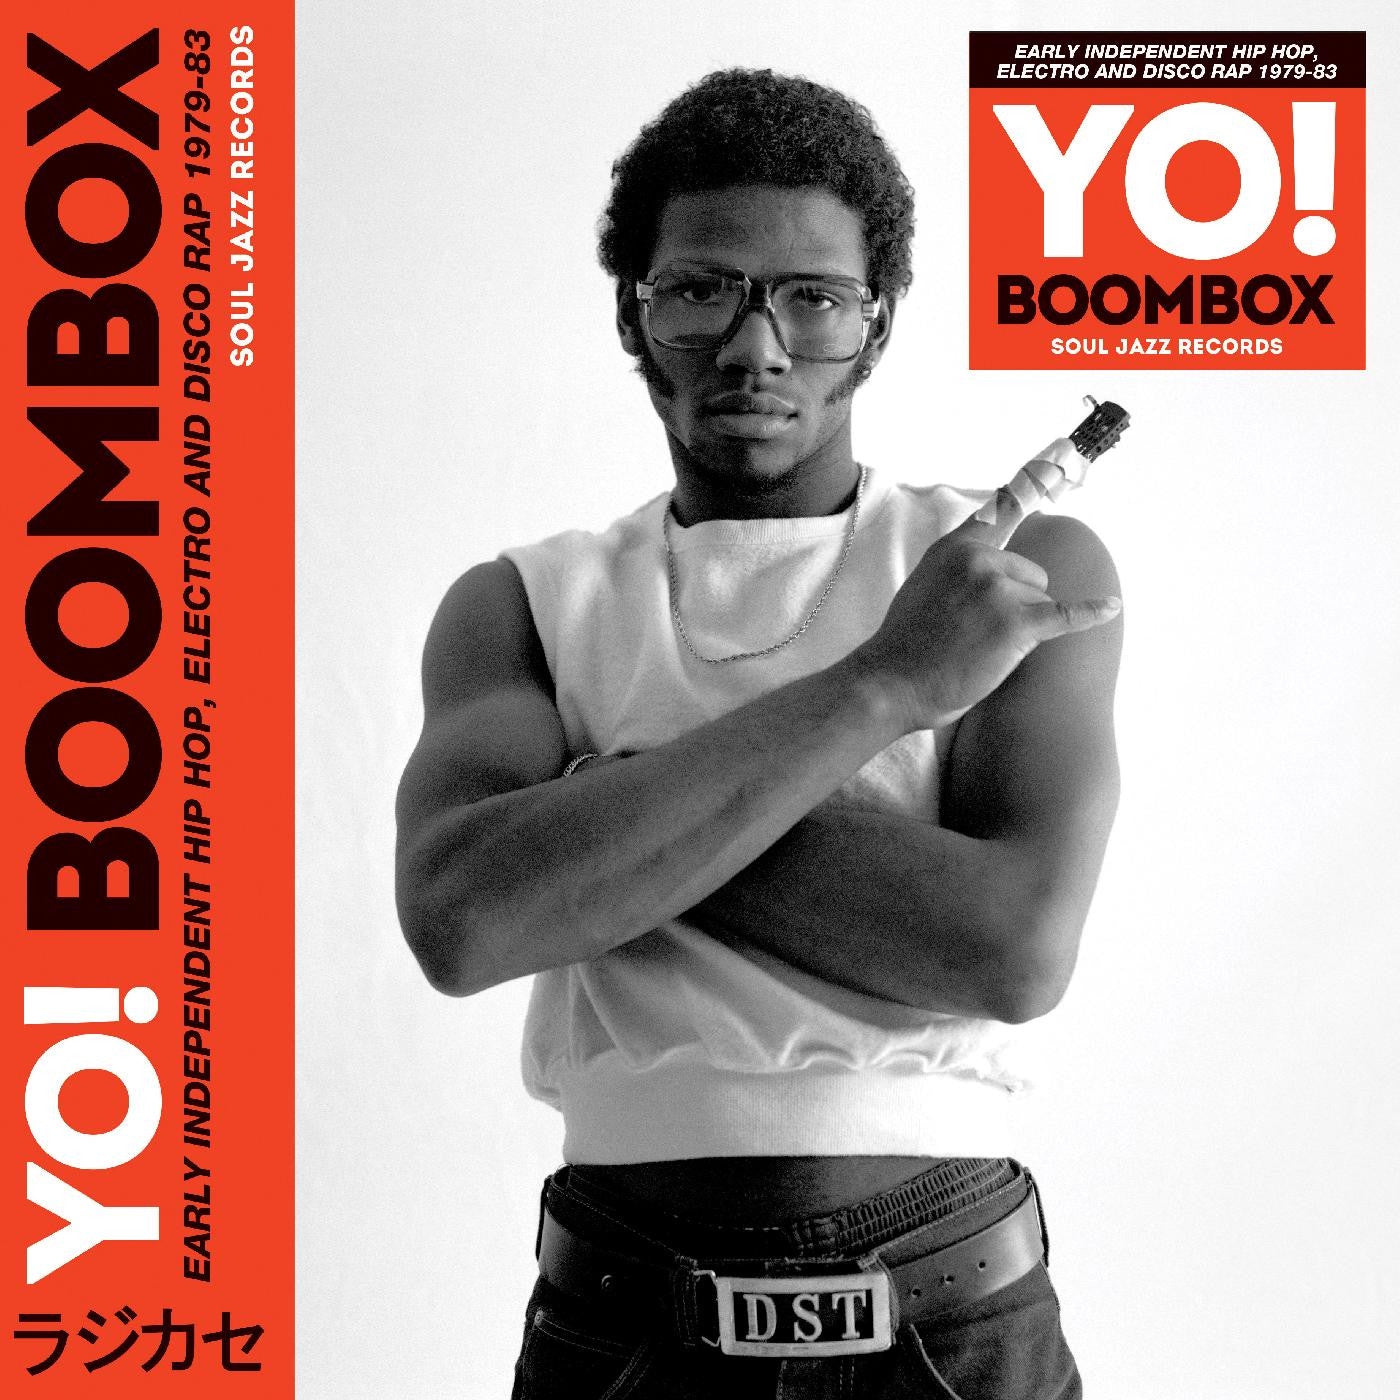 Soul Jazz Records presents: YO! BOOMBOX - Early Independent Hip Hop, Electro And Disco Rap 1979-83 - New 3 LP Record 2023 Soul Jazz UK Vinyl - Hip Hop / Electro